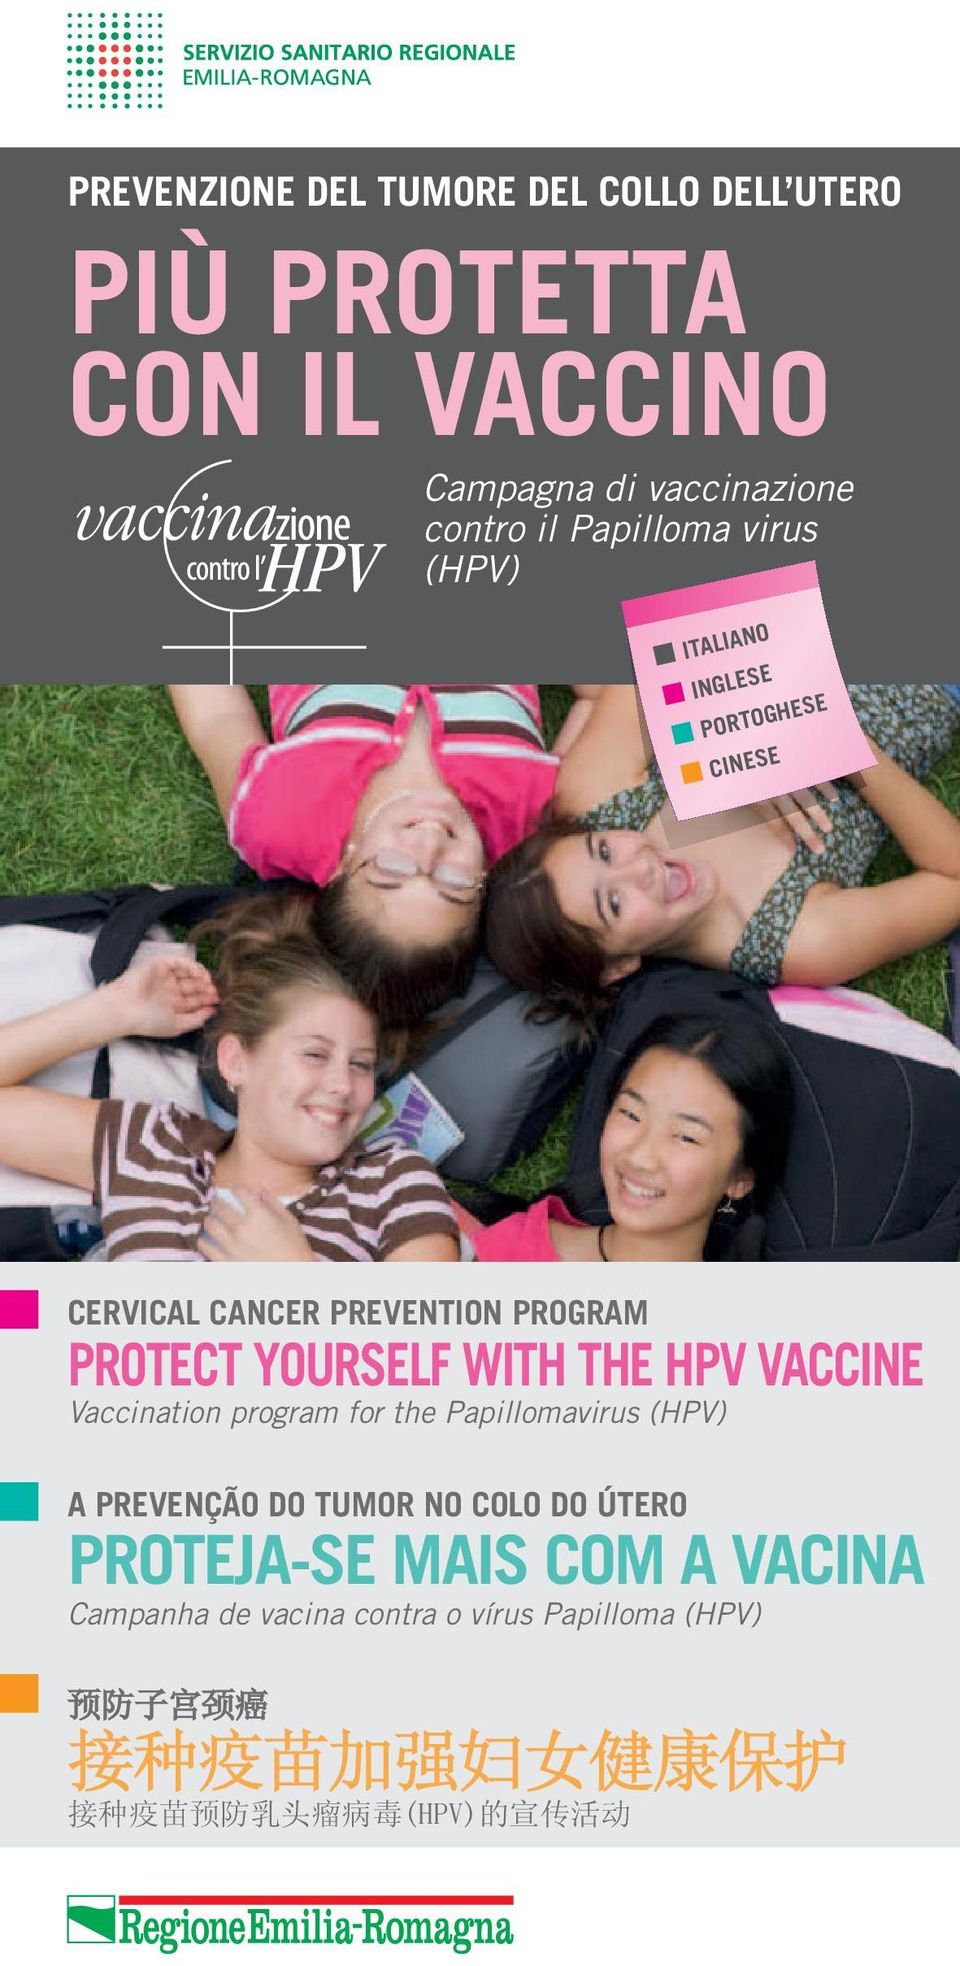 PROTECT YOURSELF WITH THE HPV VACCINE Vaccination program for the Papillomavirus (HPV) A